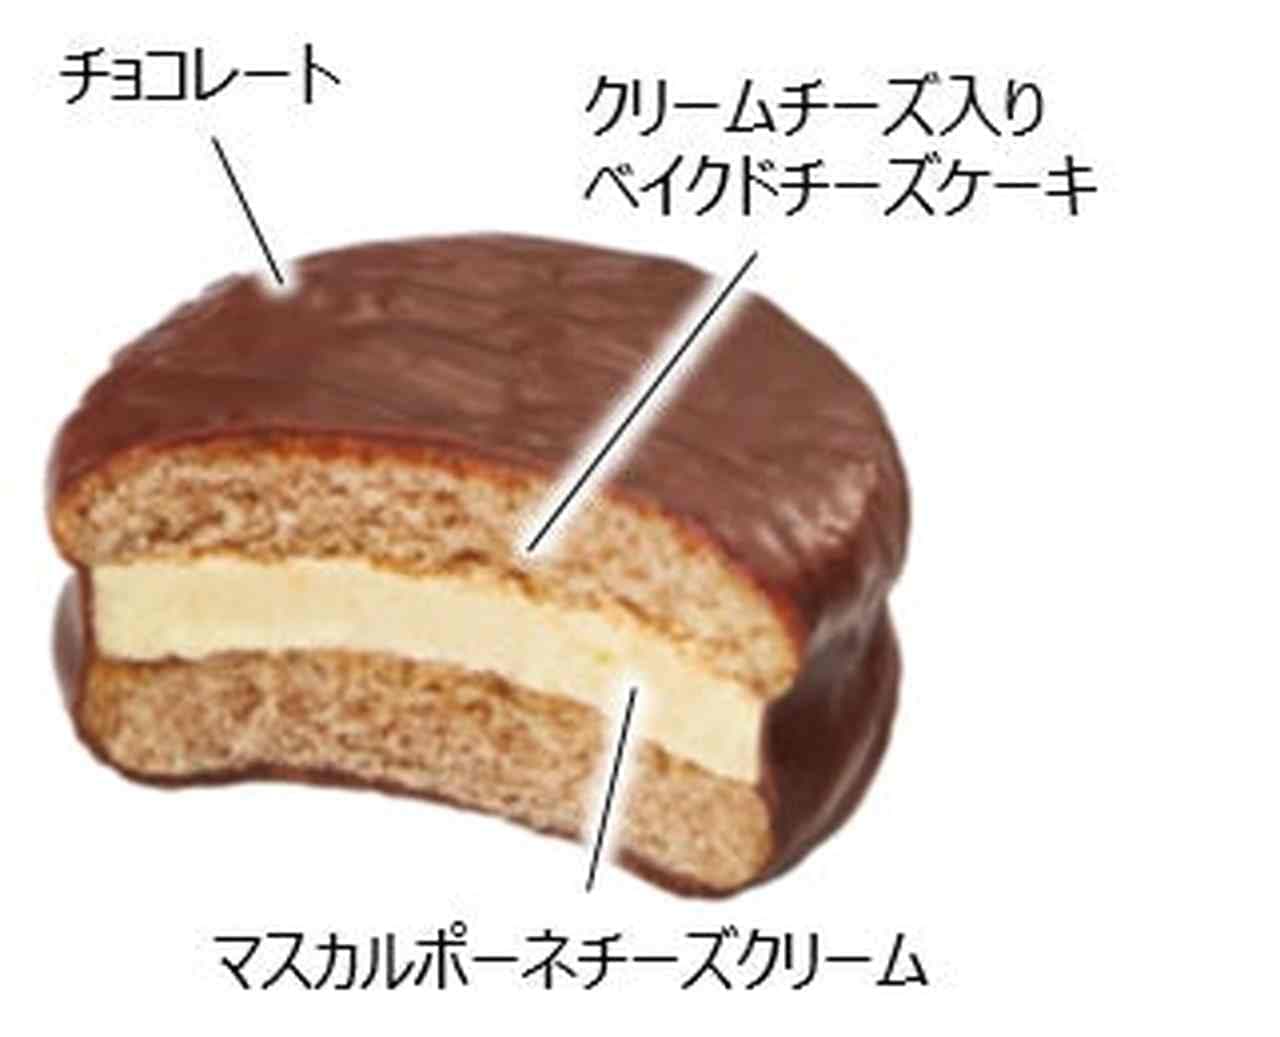 Lotte "Kotorippu Little Choco Pie [Frano Delice's Douvre Fromage]".